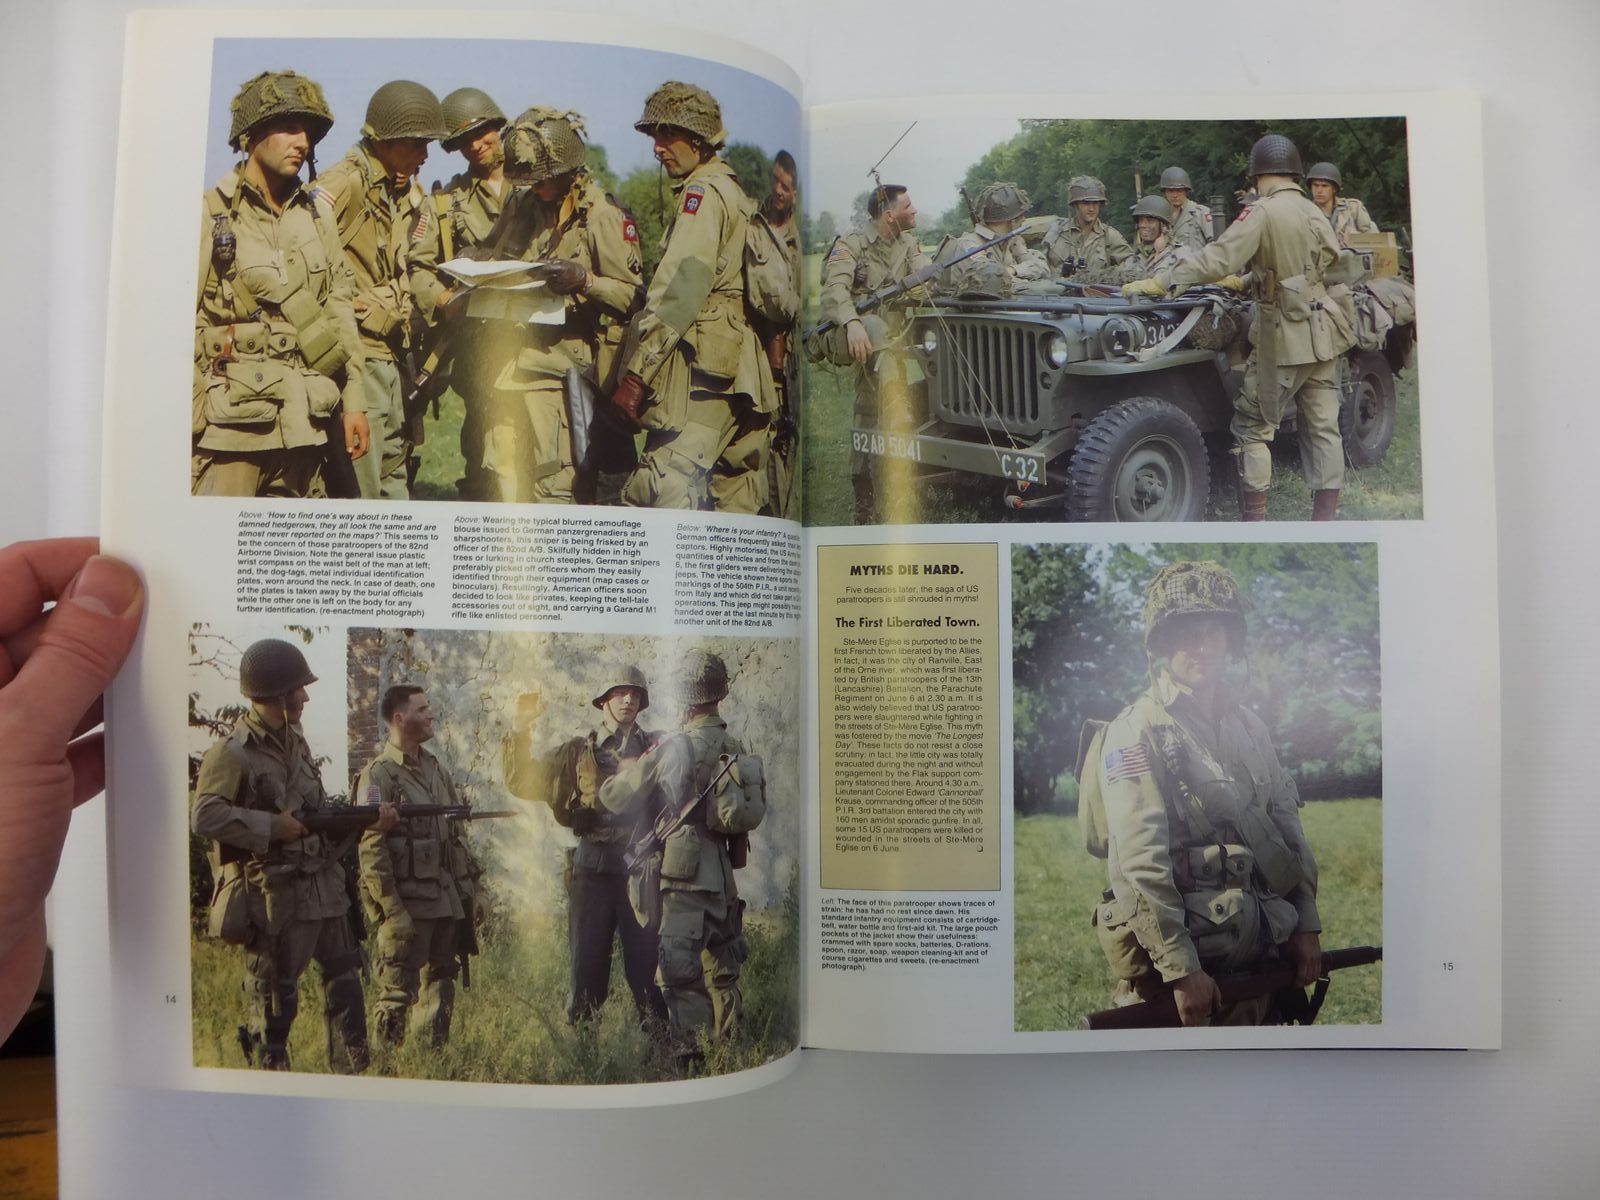 Photo of 6 JUNE 1944 SOLDIERS IN NORMANDY written by Charbonnier, Philippe
Van Keer, Yves J.
Villaume, Jean-Pierre published by Histoire & Collections (STOCK CODE: 2120684)  for sale by Stella & Rose's Books